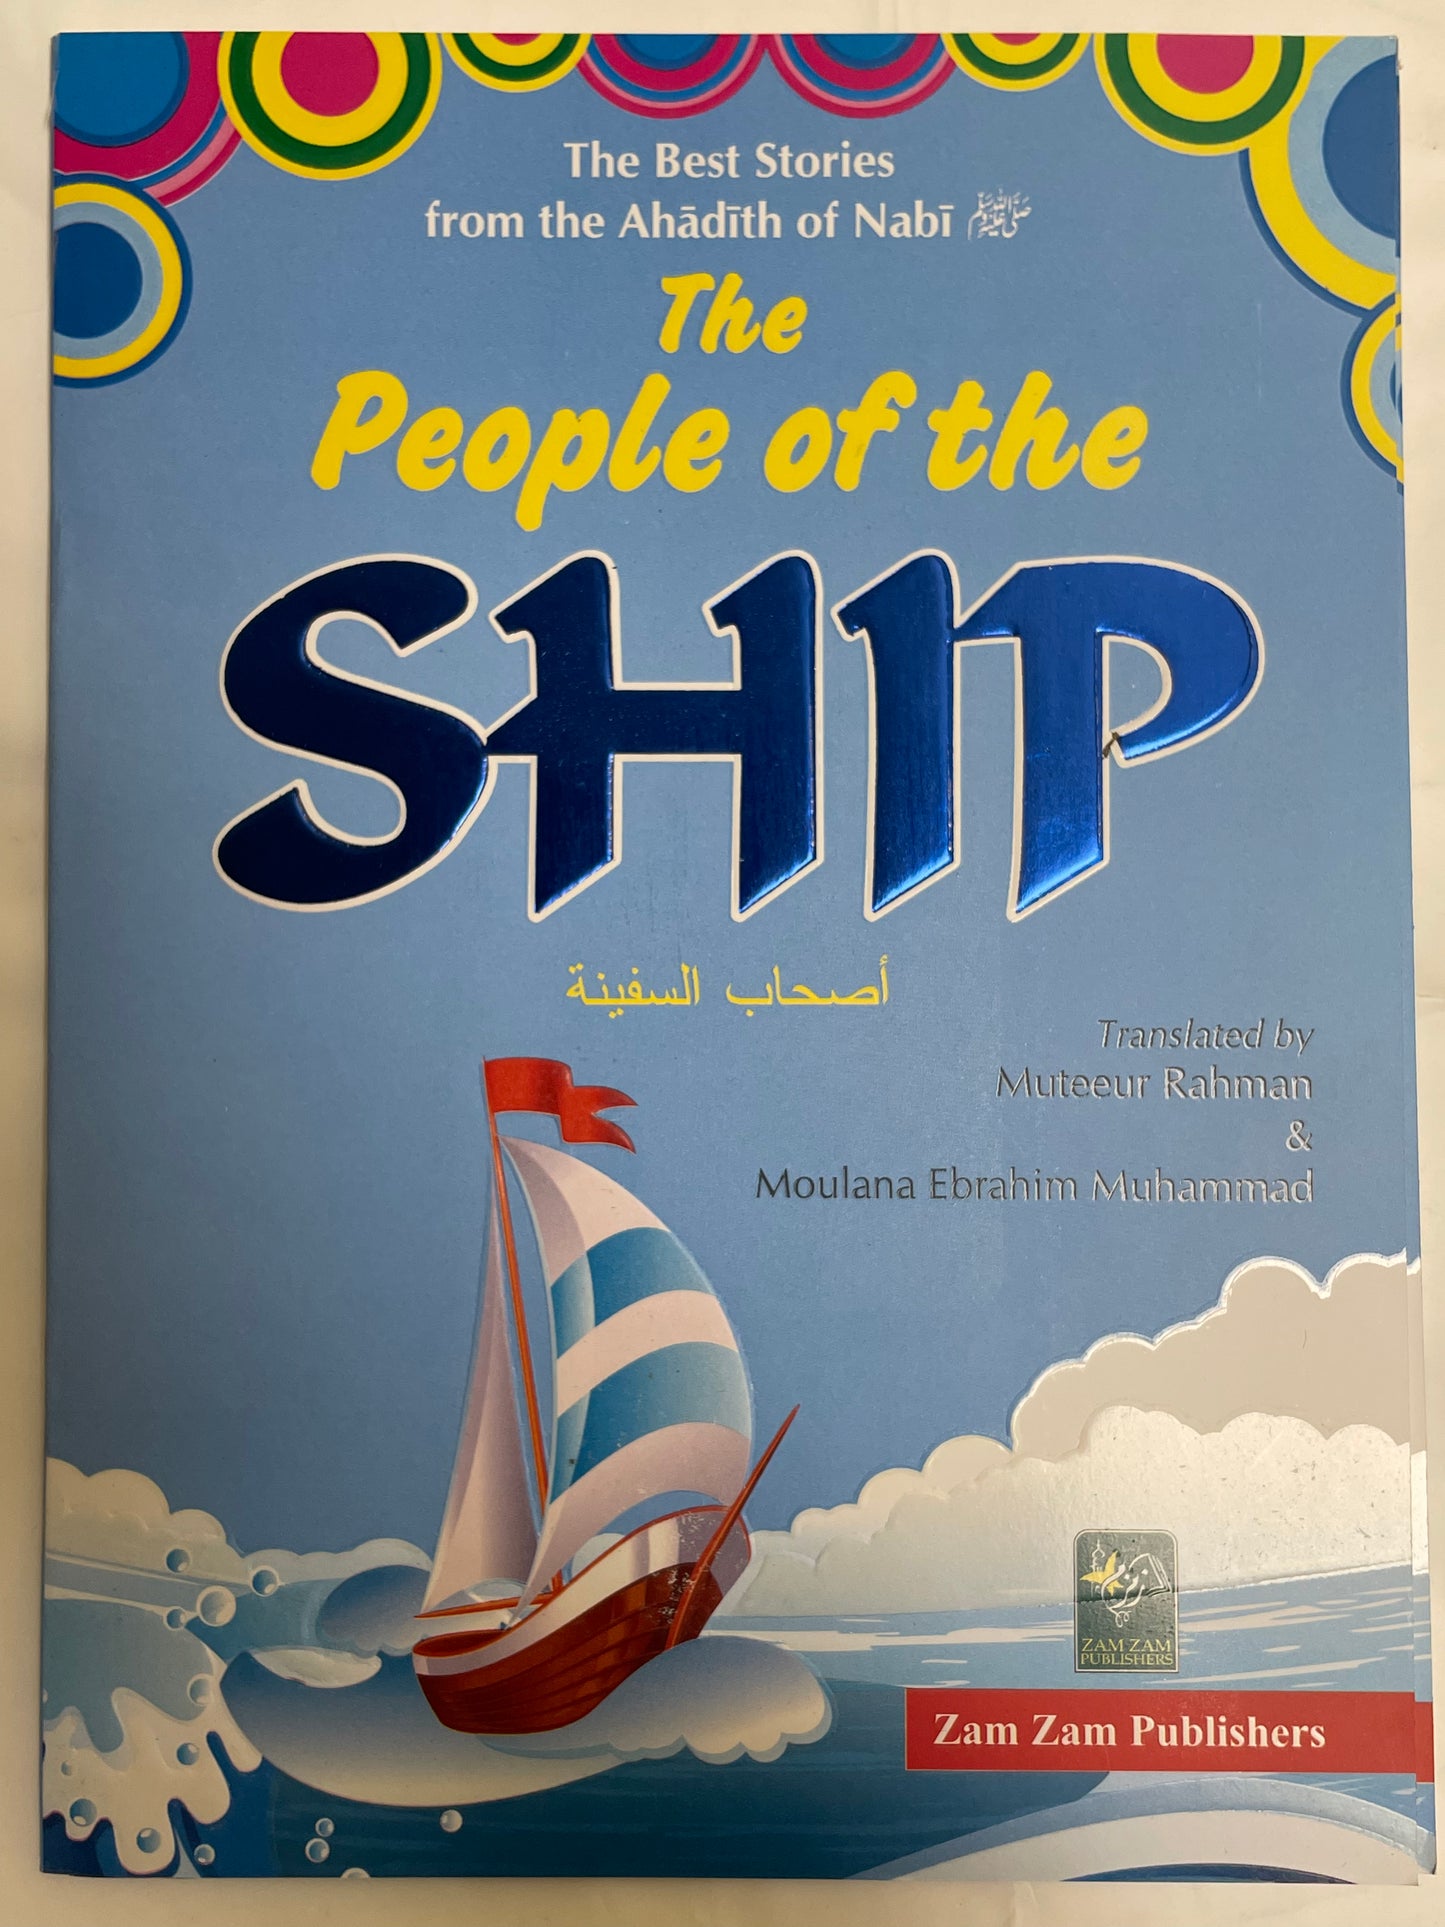 The People of the Ship